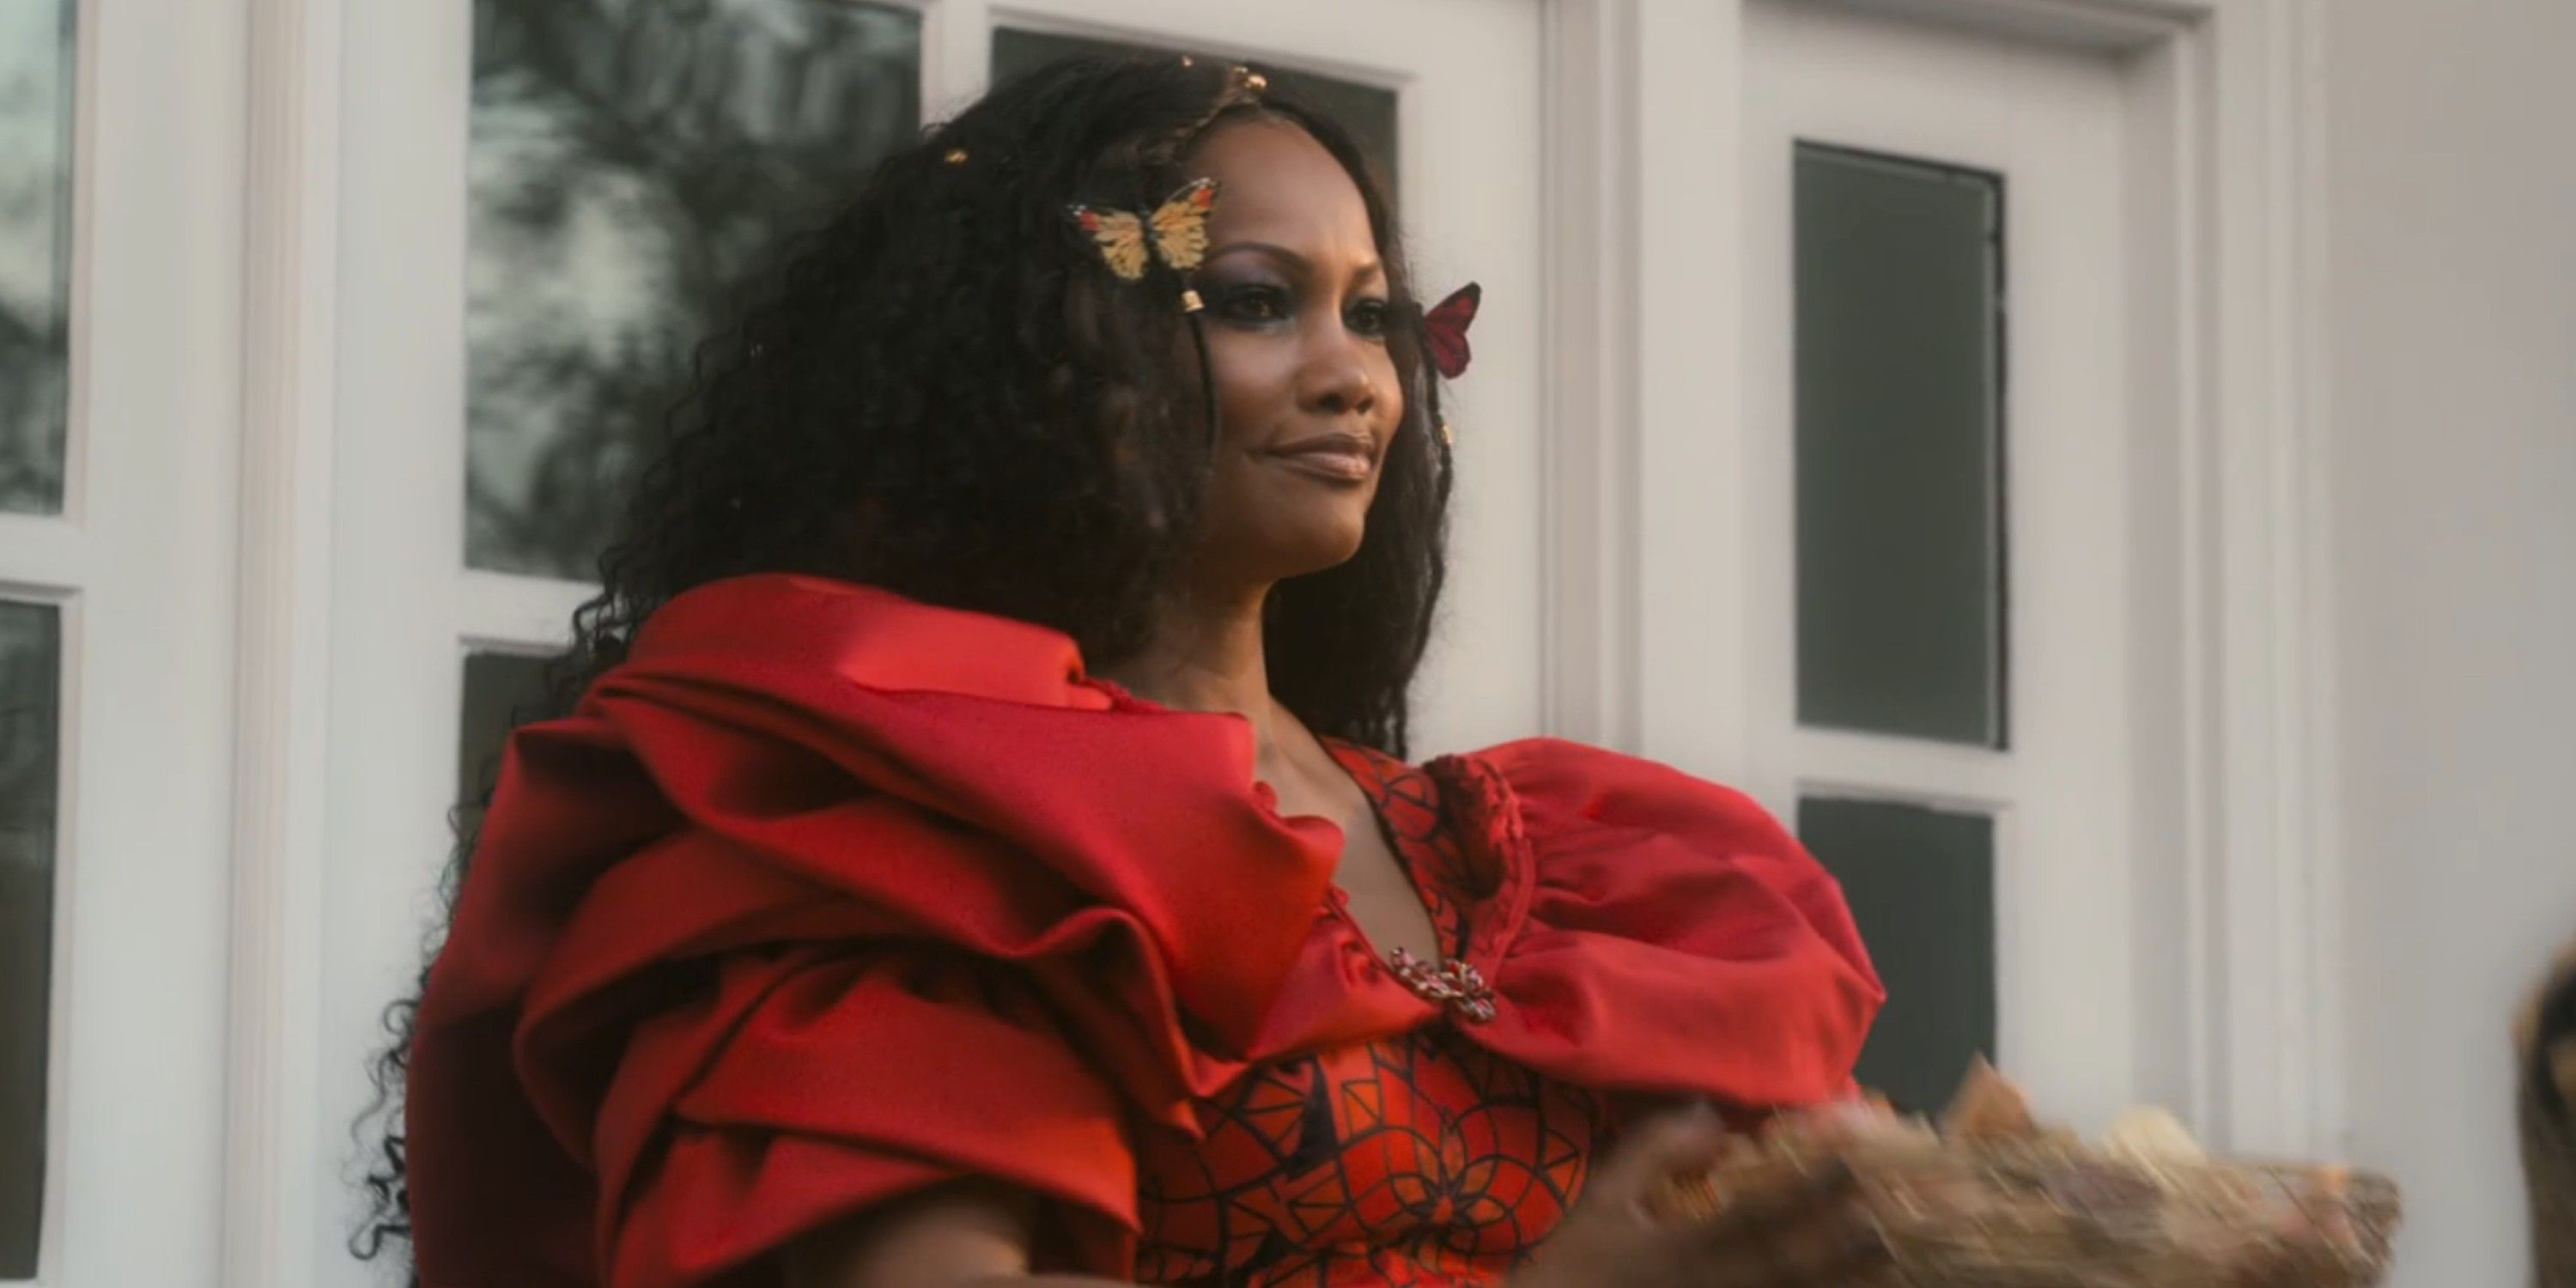 Garcelle Beauvais as Grace in Coming 2 America on Amazon Prime